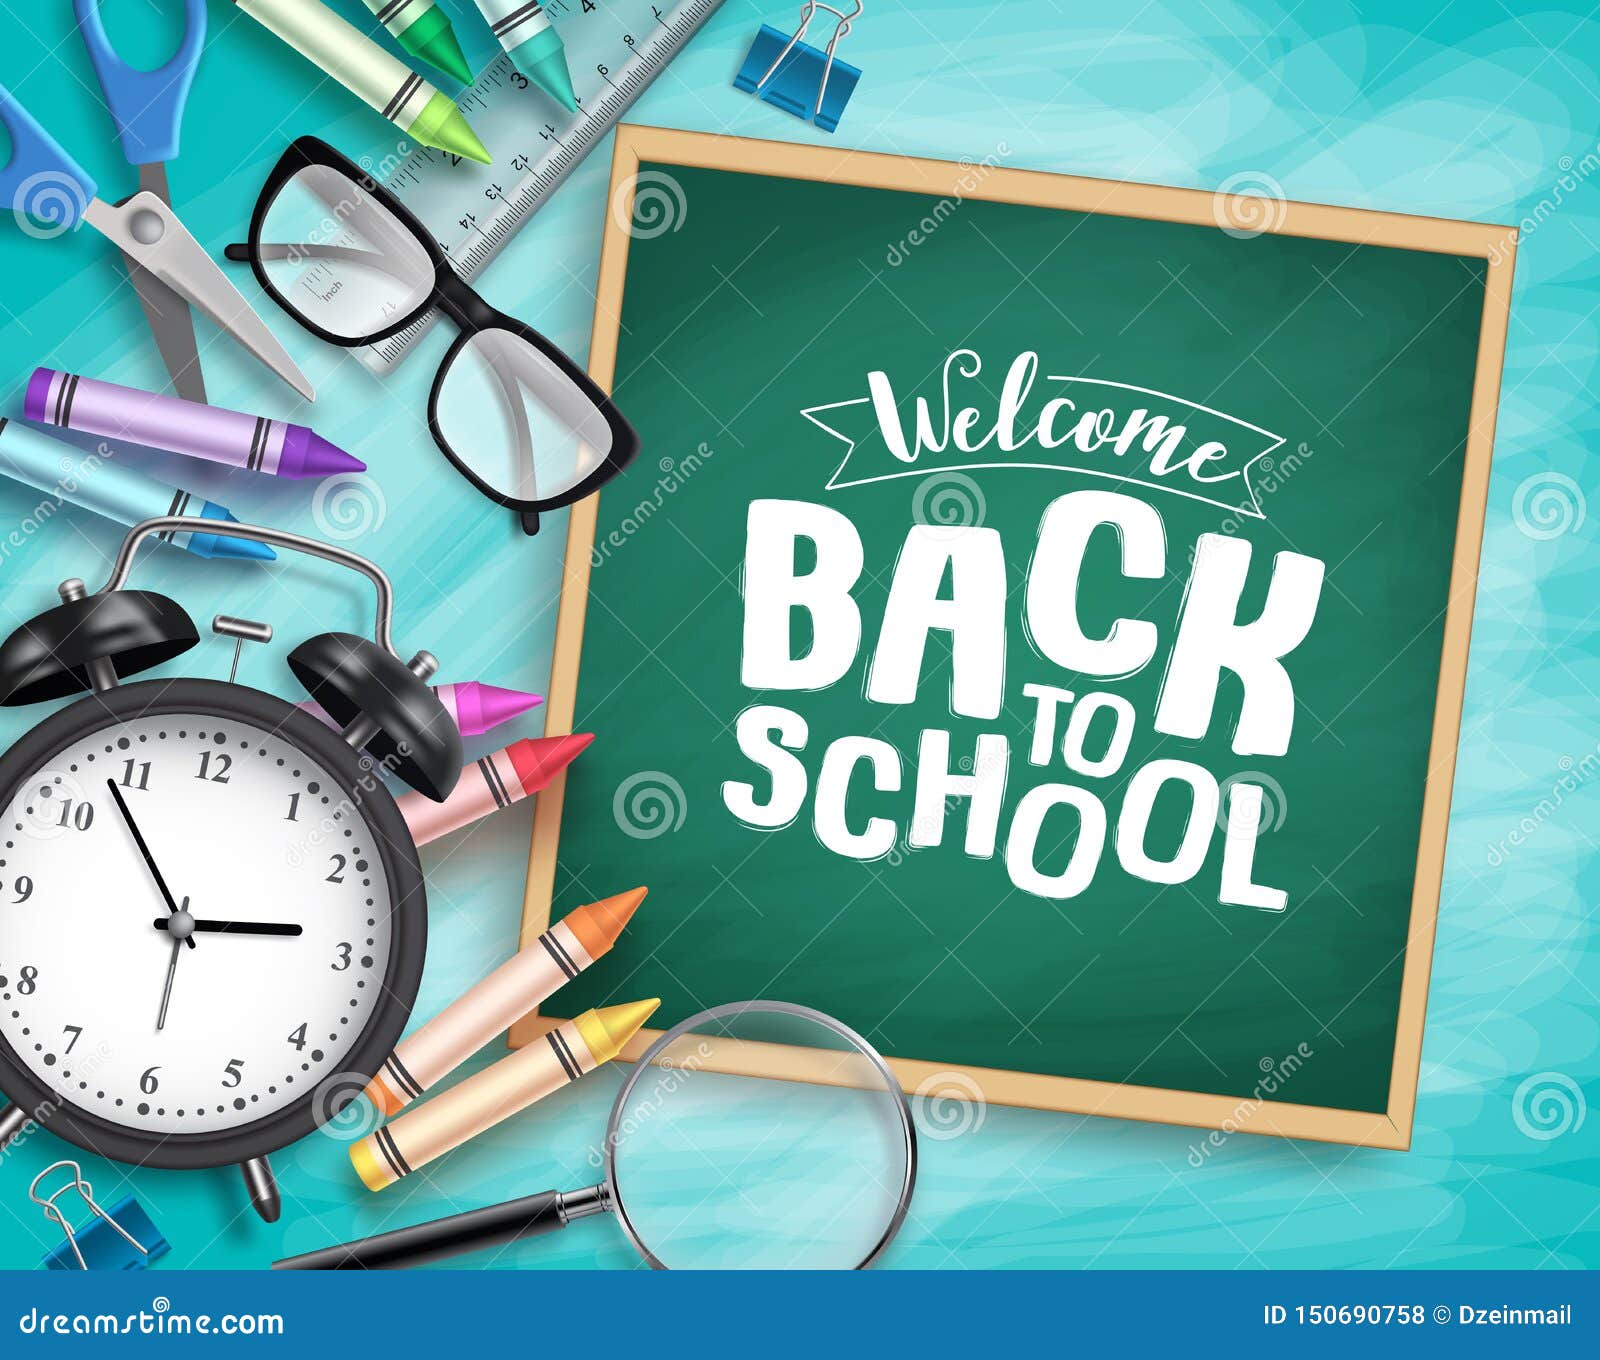 Back To School Vector Background Template Welcome Back To School Greeting Text Stock Photo Image Of Illustrationn Concept